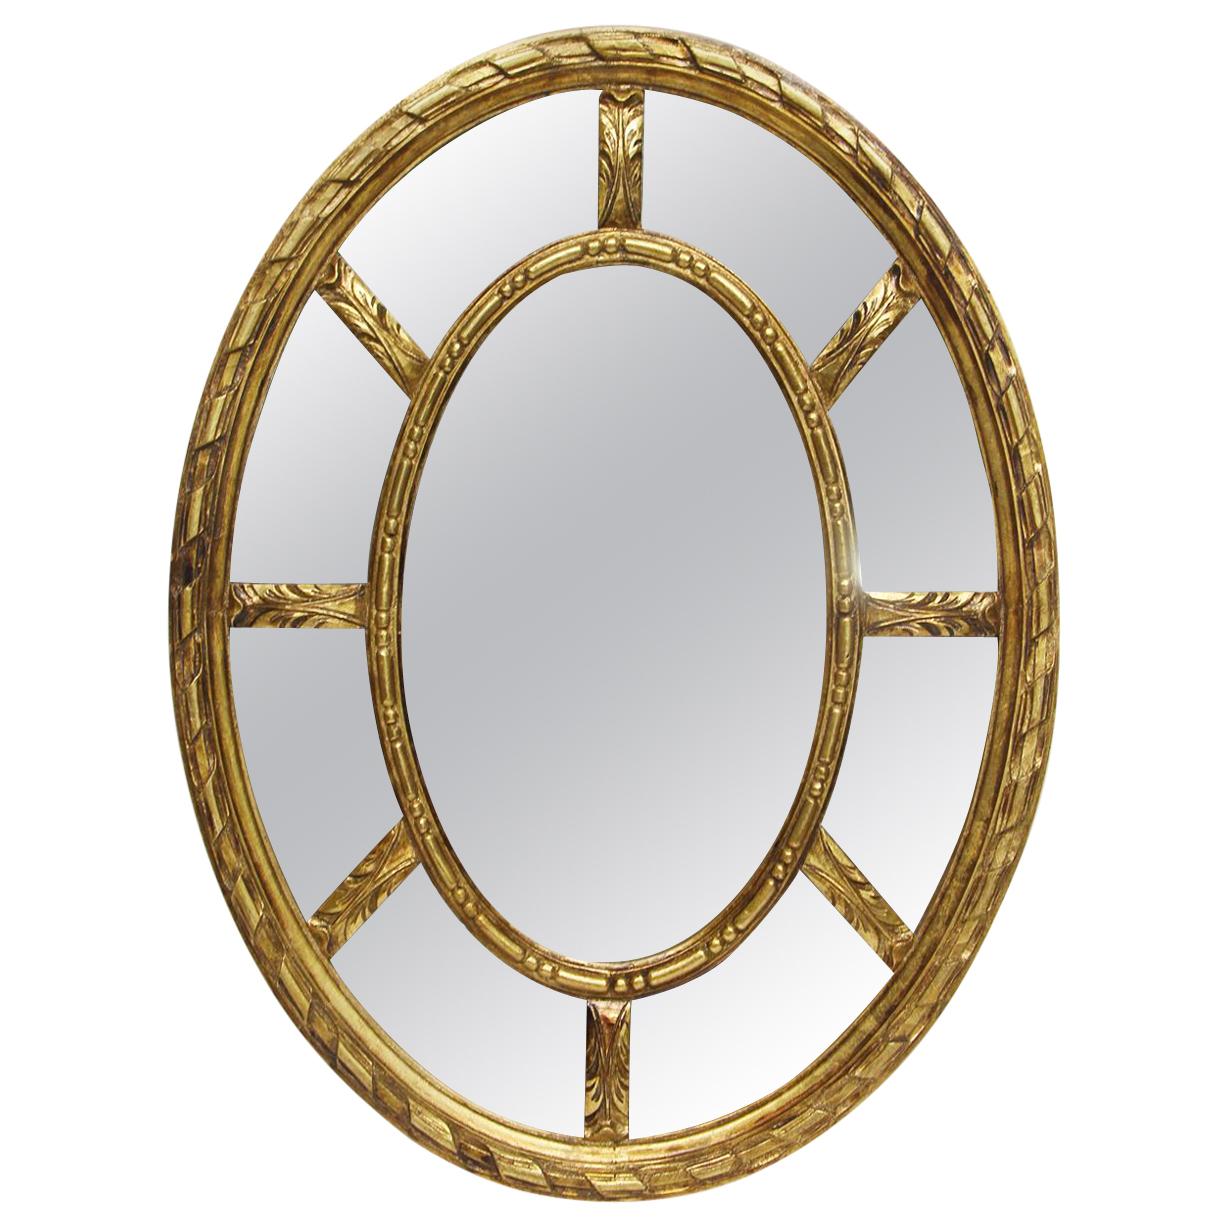 1950s Gilded Oval Wall Mirror from France